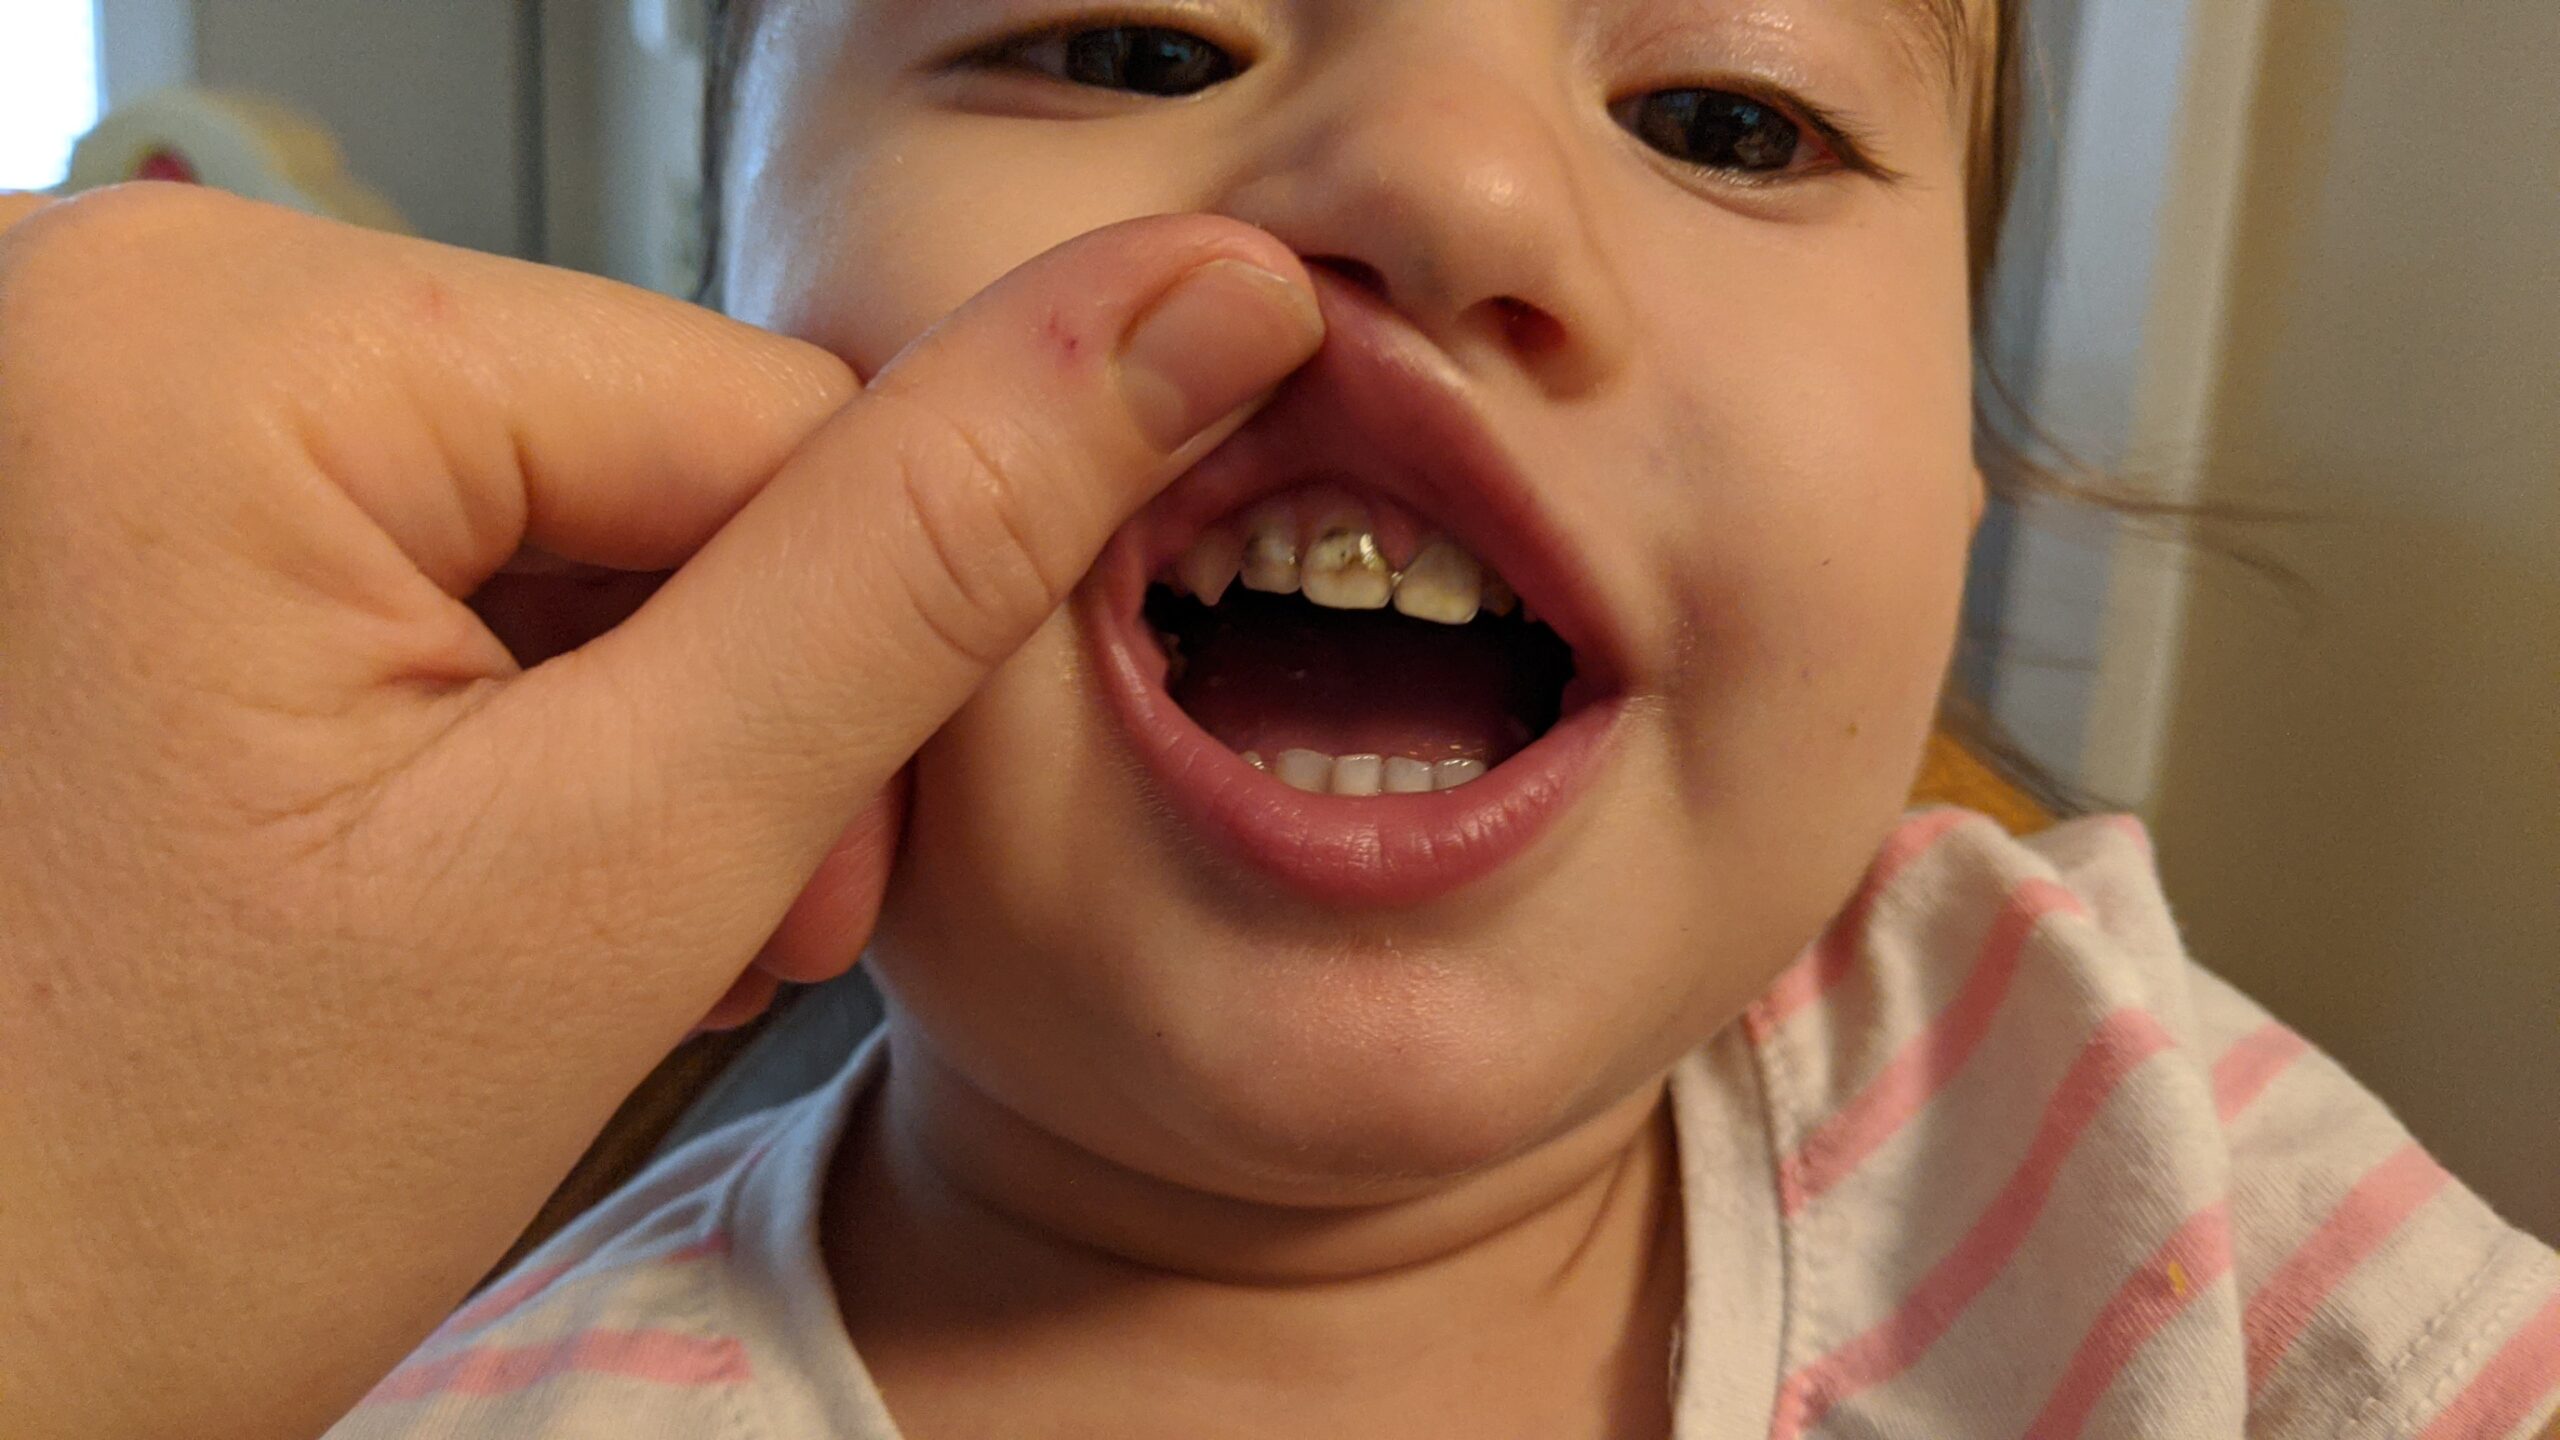 Mama Rissa's daughter showing her early childhood caries